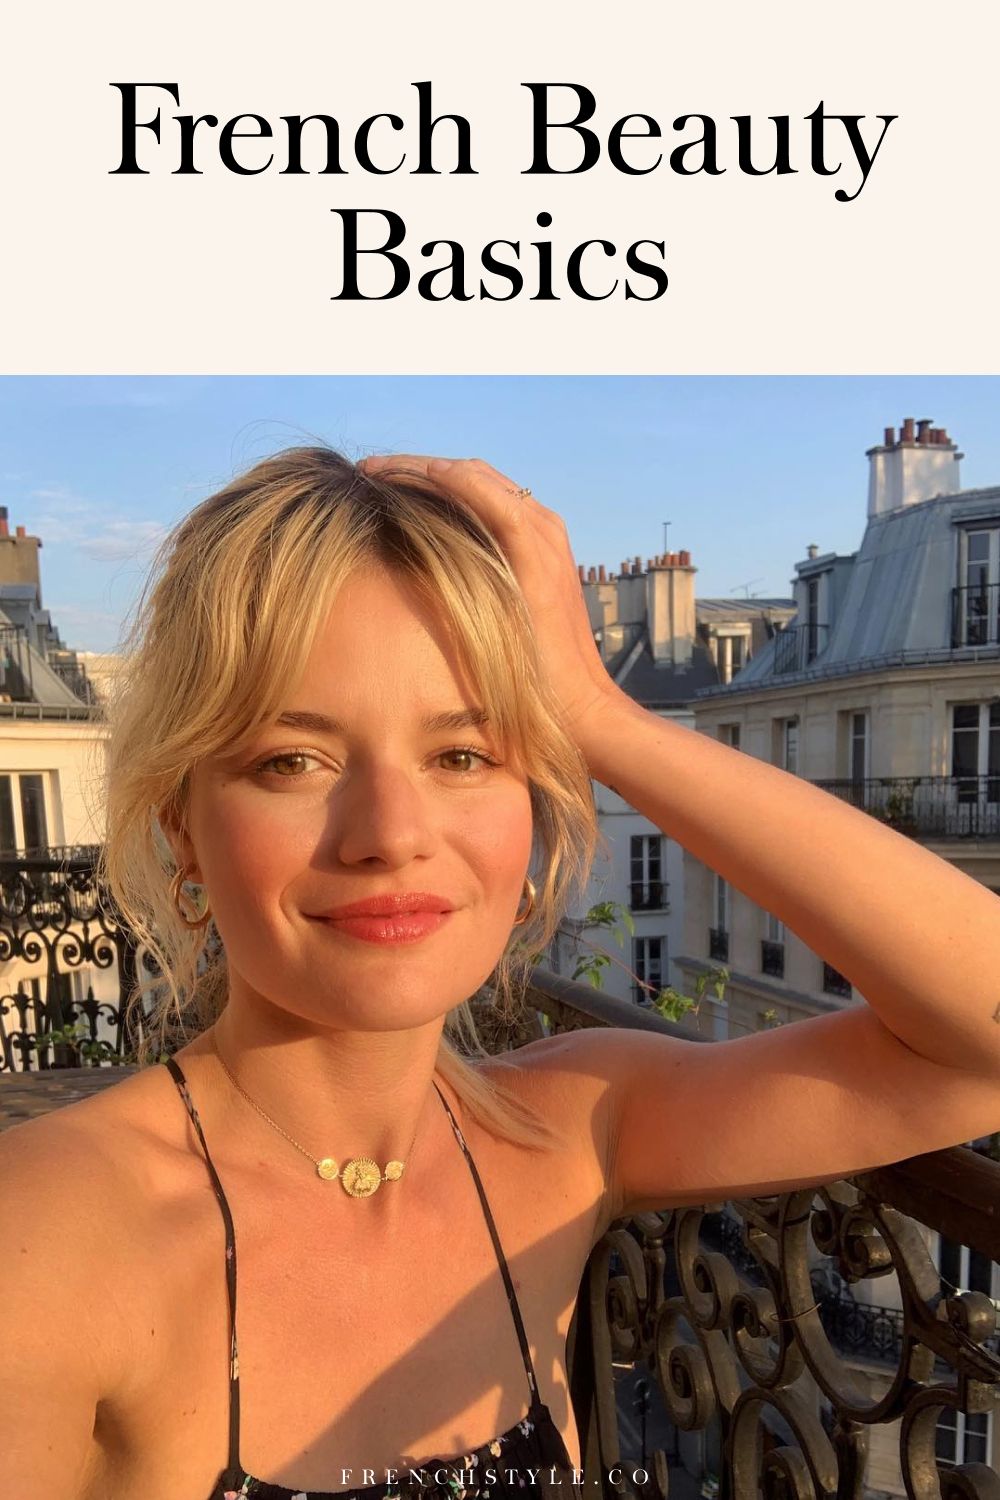 French beauty advice is often characterized by its less-is-more approach. Here are the French beauty basics you MUST know to get the perfect French girl beauty look!